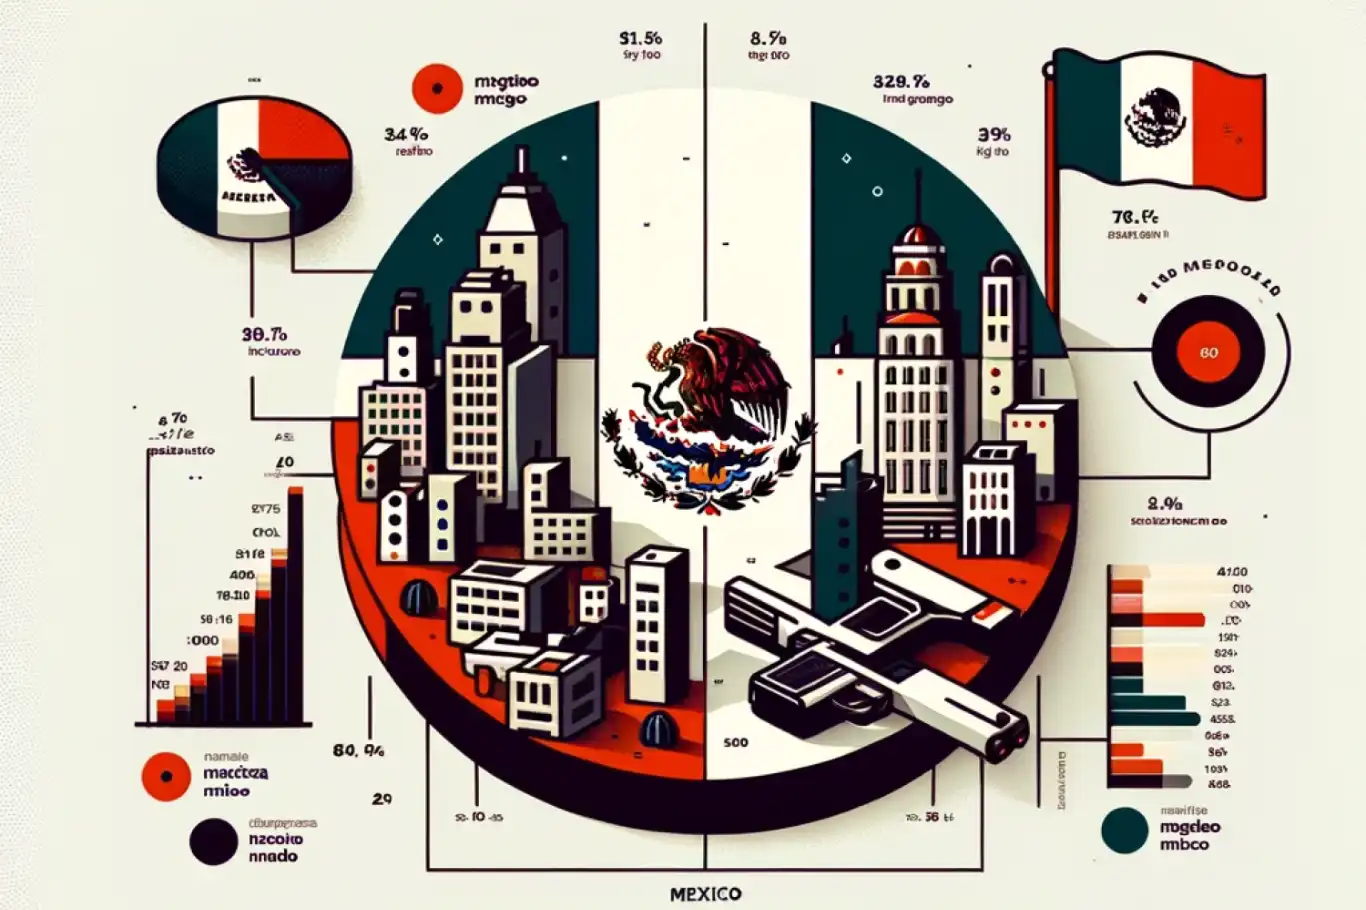 Infographic illustration featuring the Mexican flag alongside key data and statistics related to Mexico